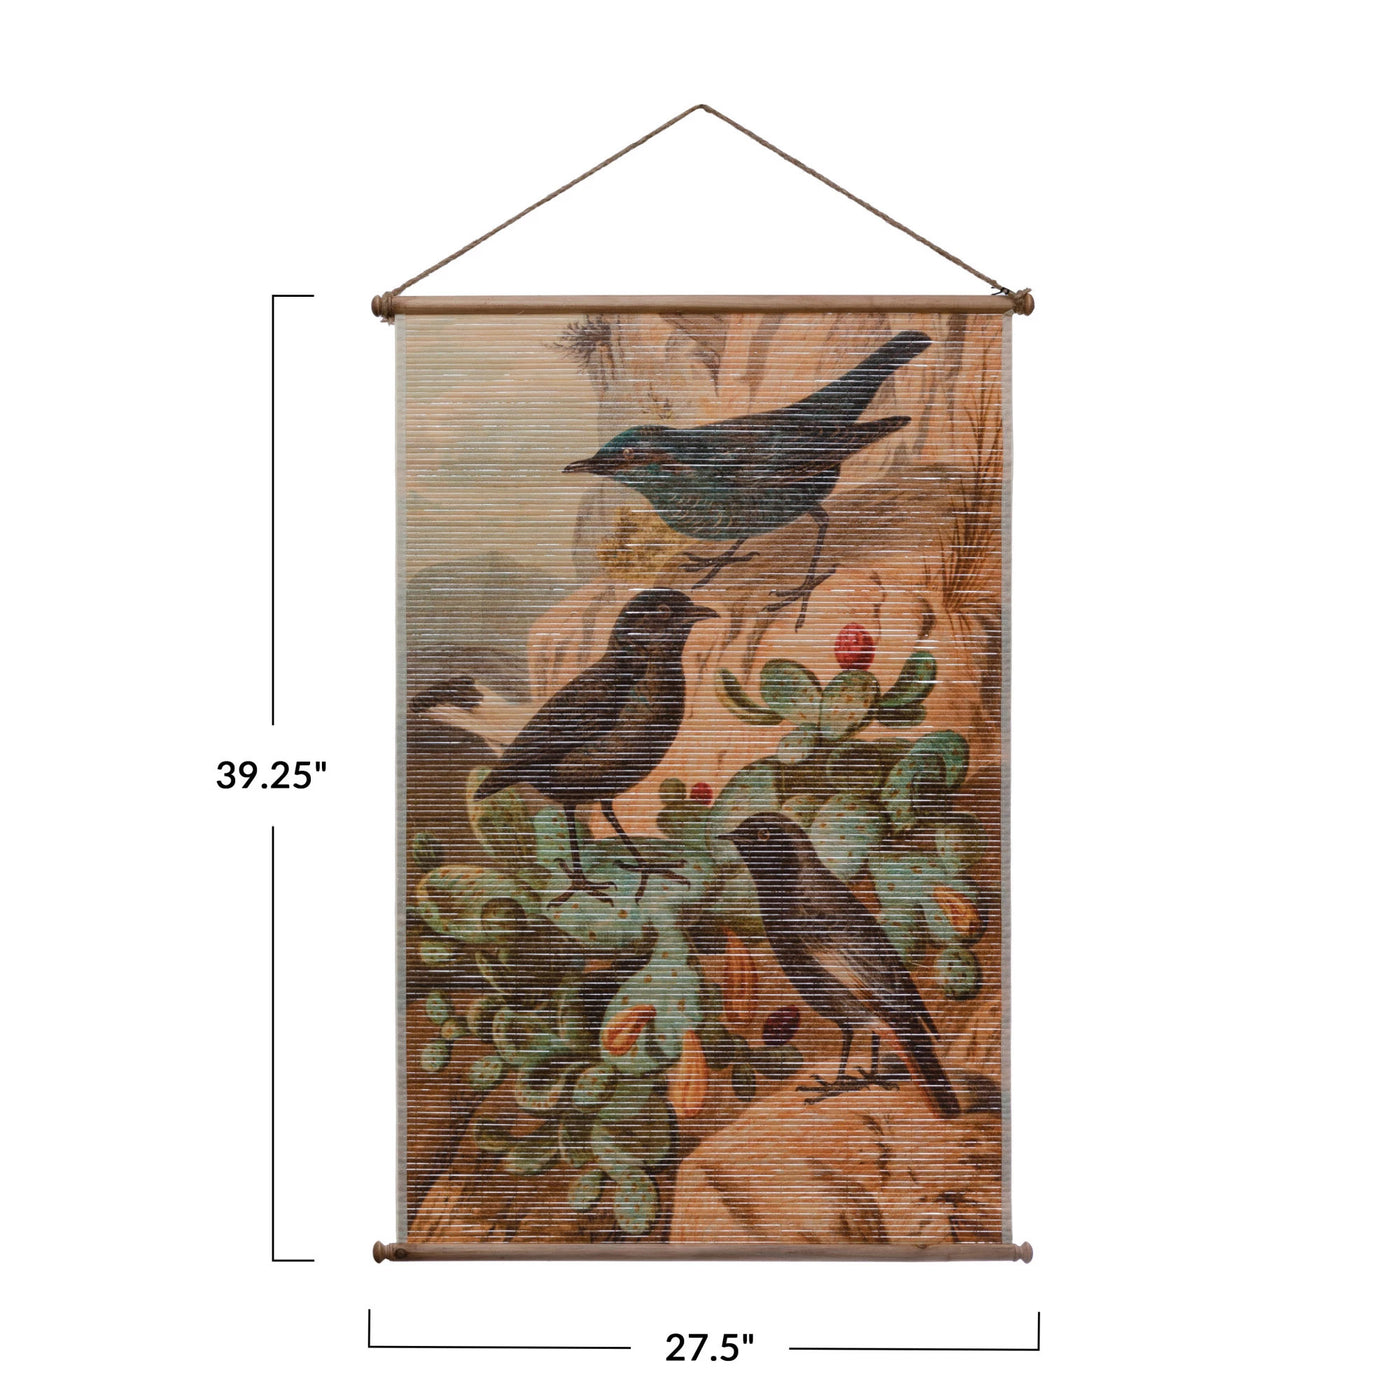 Vintage Style Bamboo Scroll with Birds